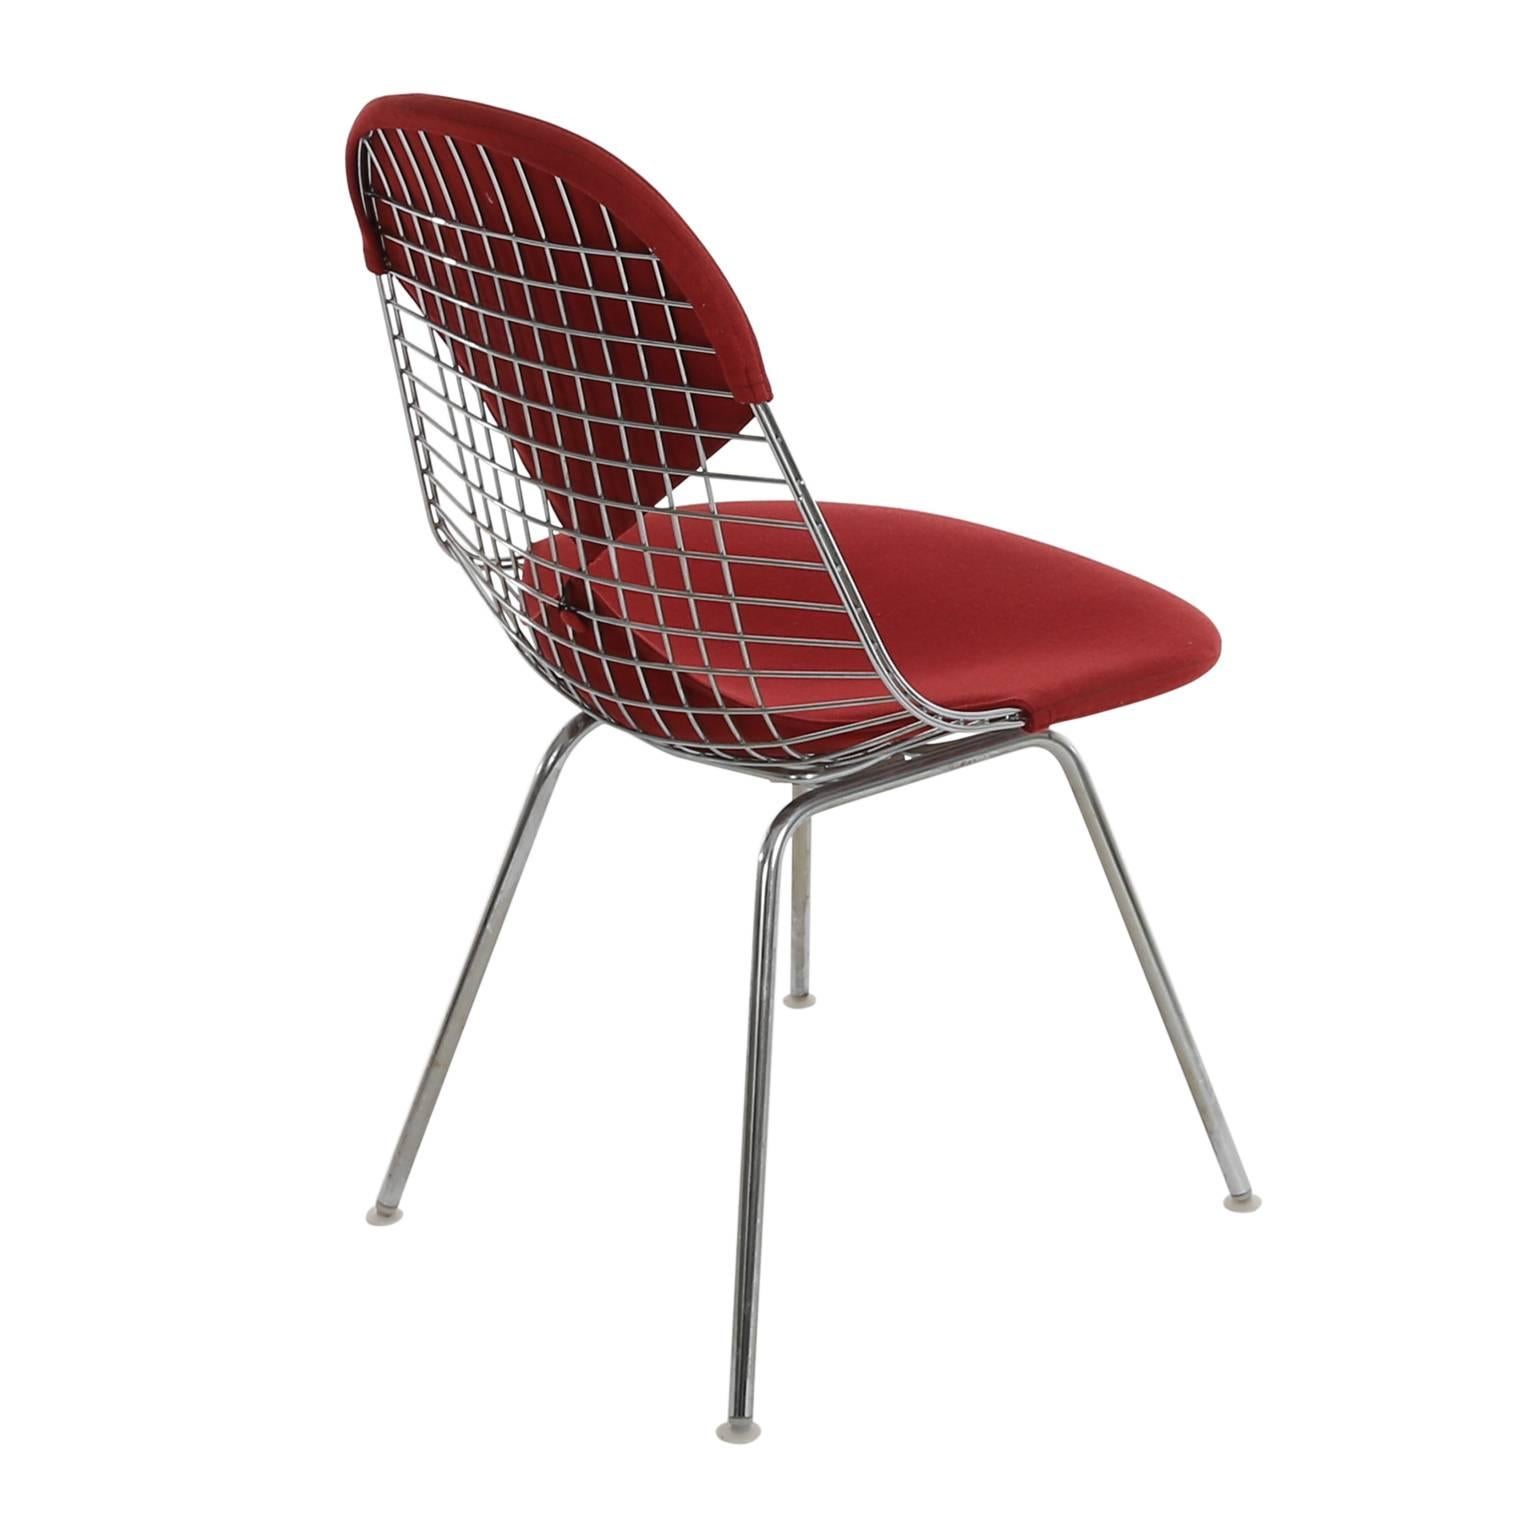 Mid-Century Modern Wire Chair DKX 5 by Ray & Charles Eames with Red Bikini Cover Designed in 1951 For Sale